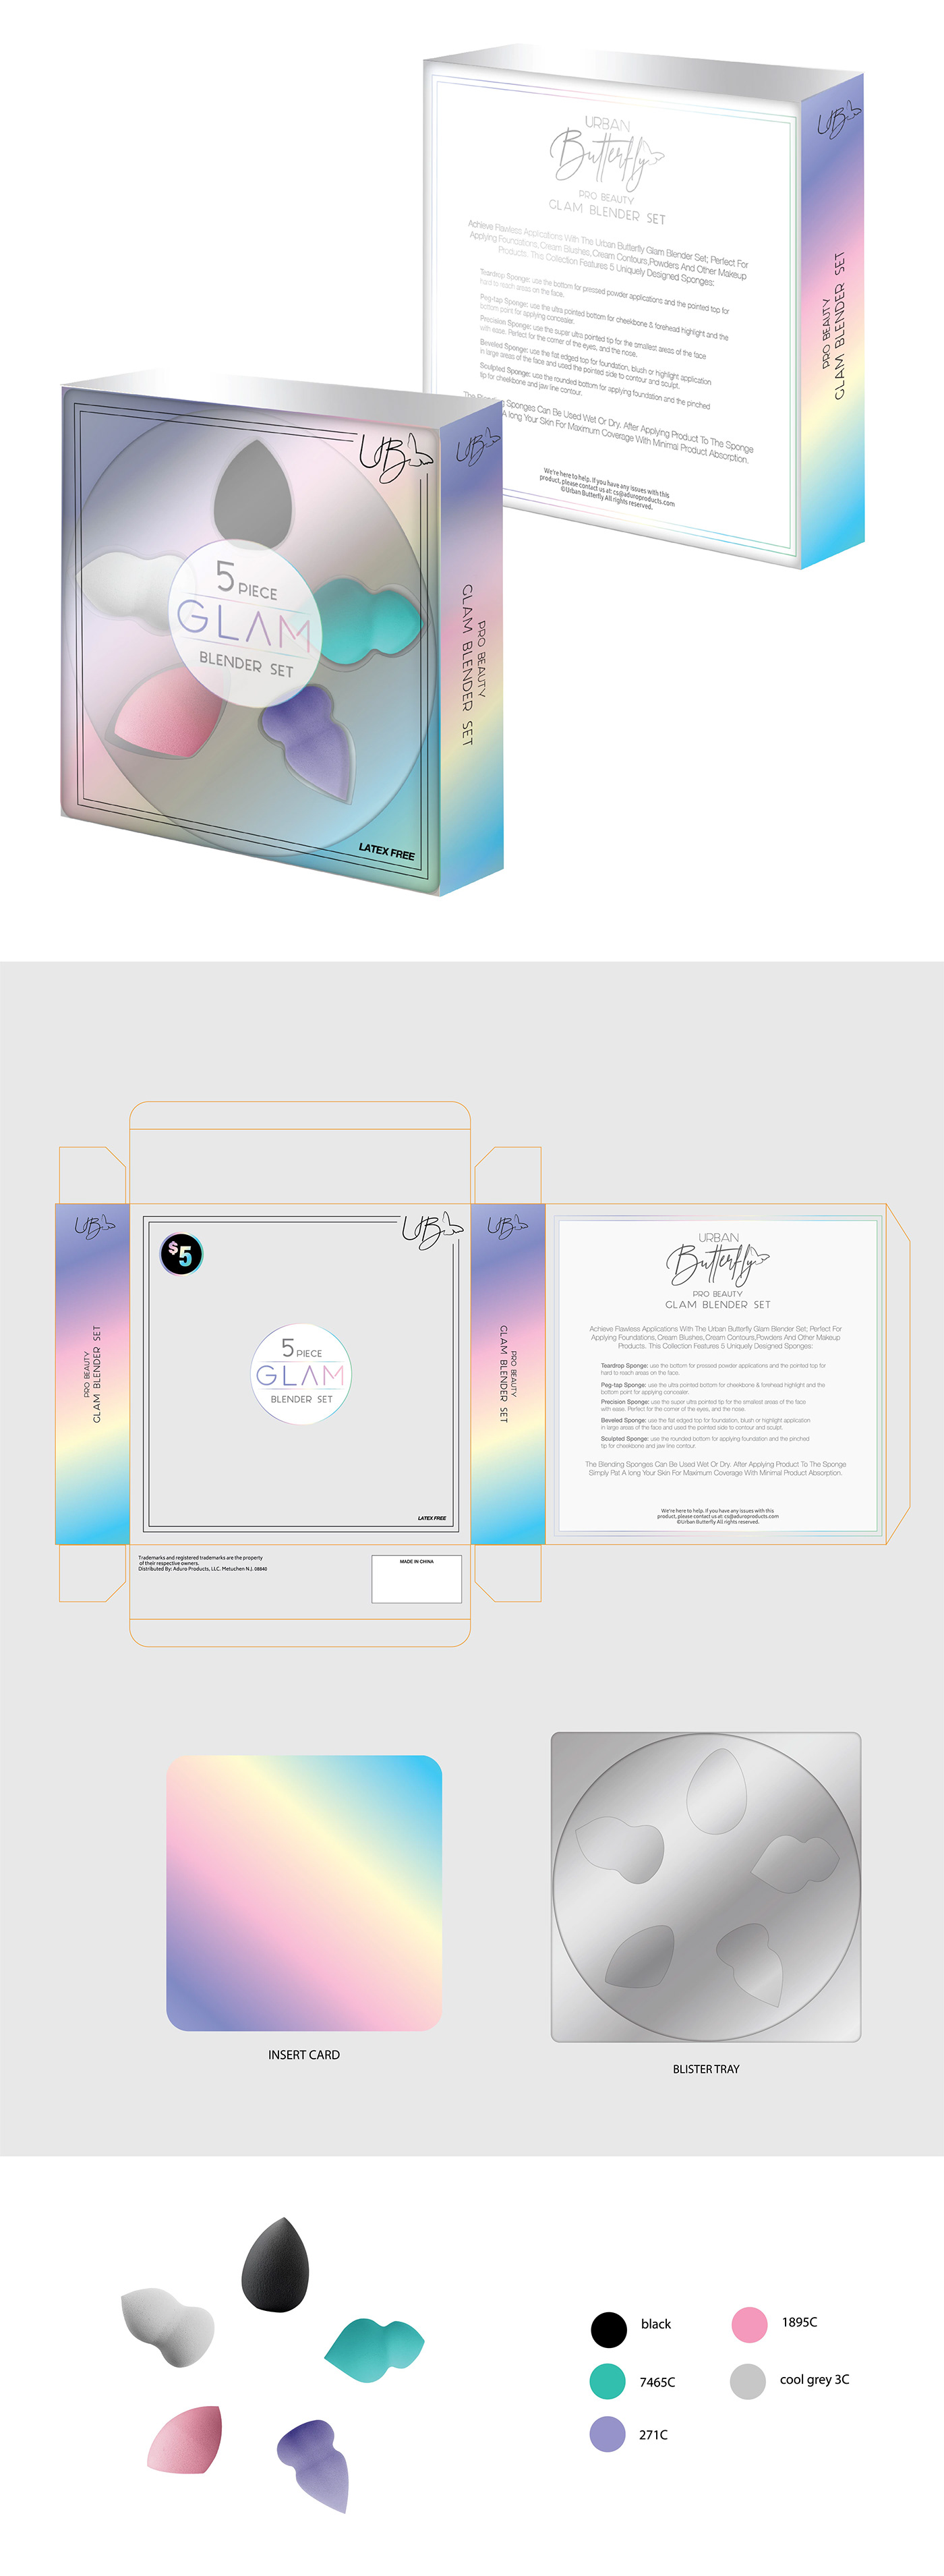 design Packaging packaging design Graphic Designer Brand Design Beauty Products product design  holographic iridescent colors